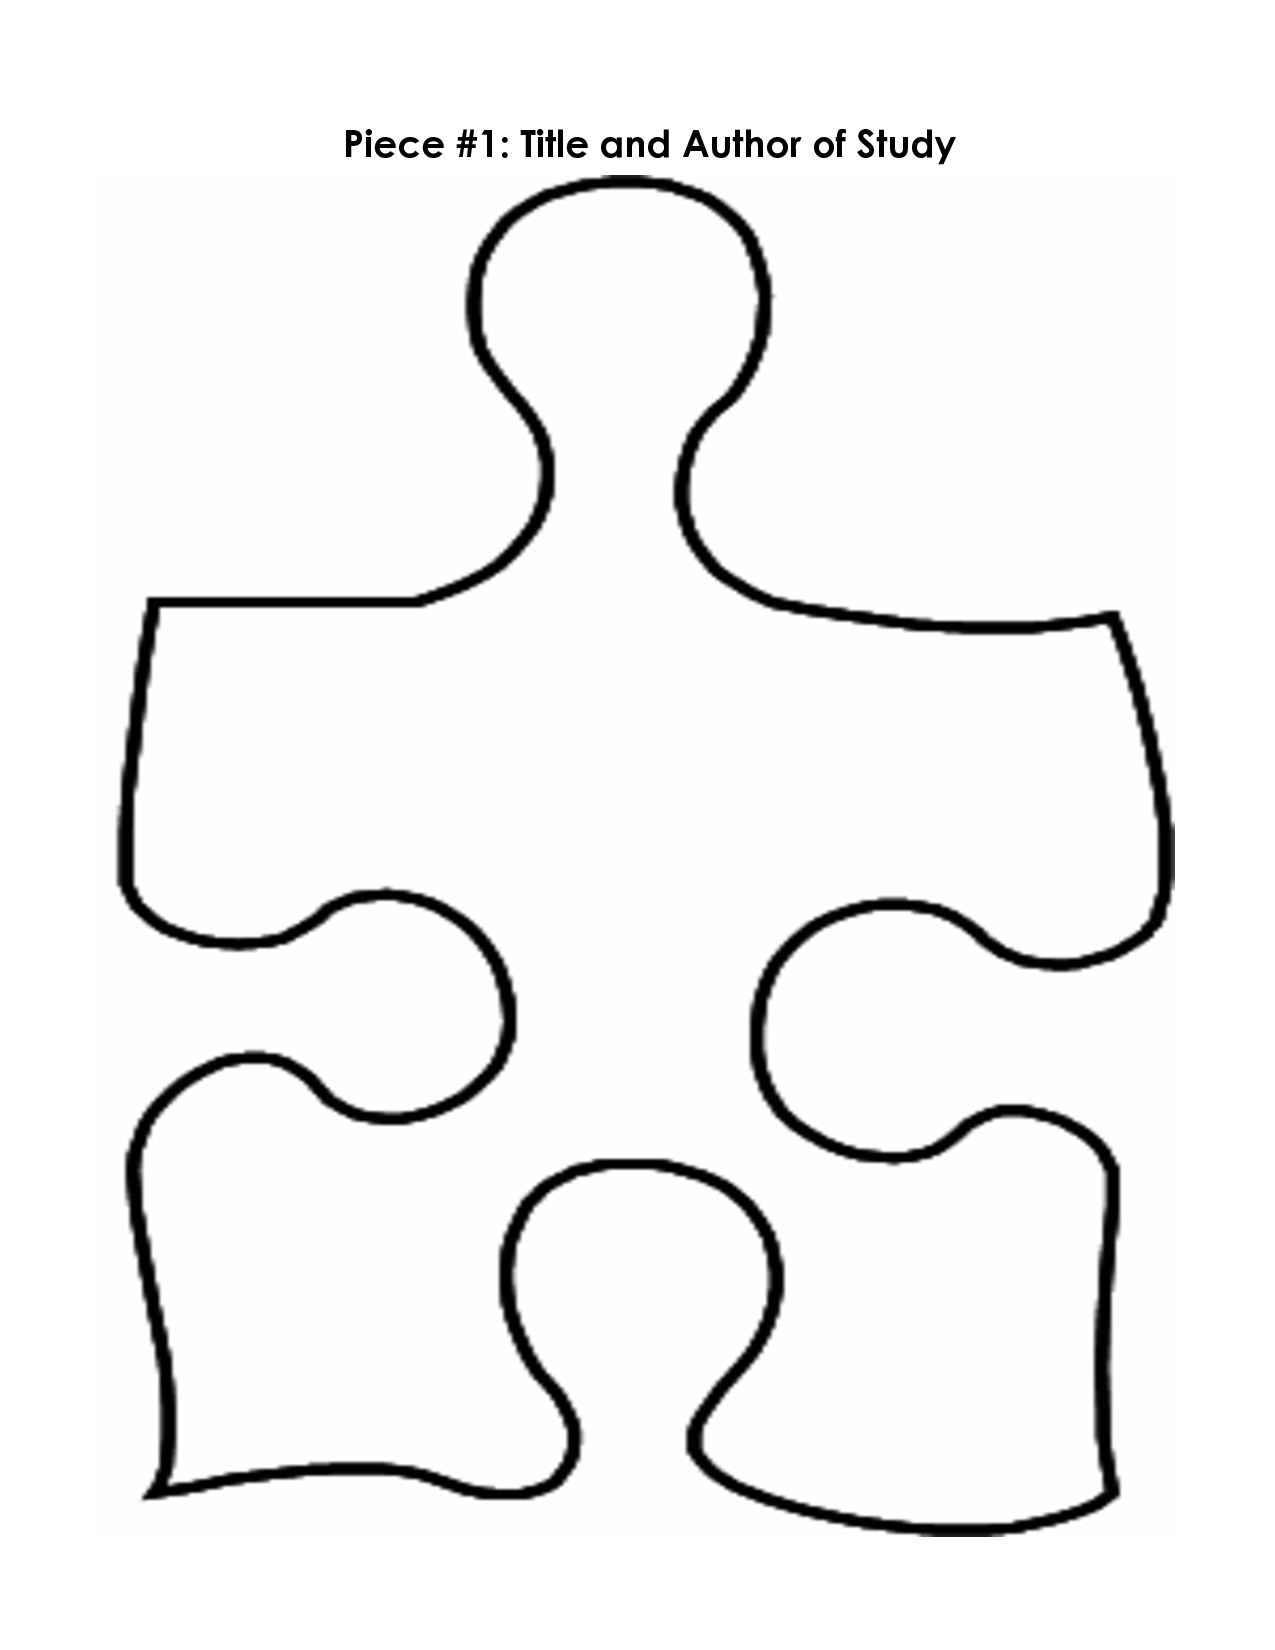 Free Puzzle Pieces Template, Download Free Clip Art, Free Clip Art - Printable Puzzle Pieces